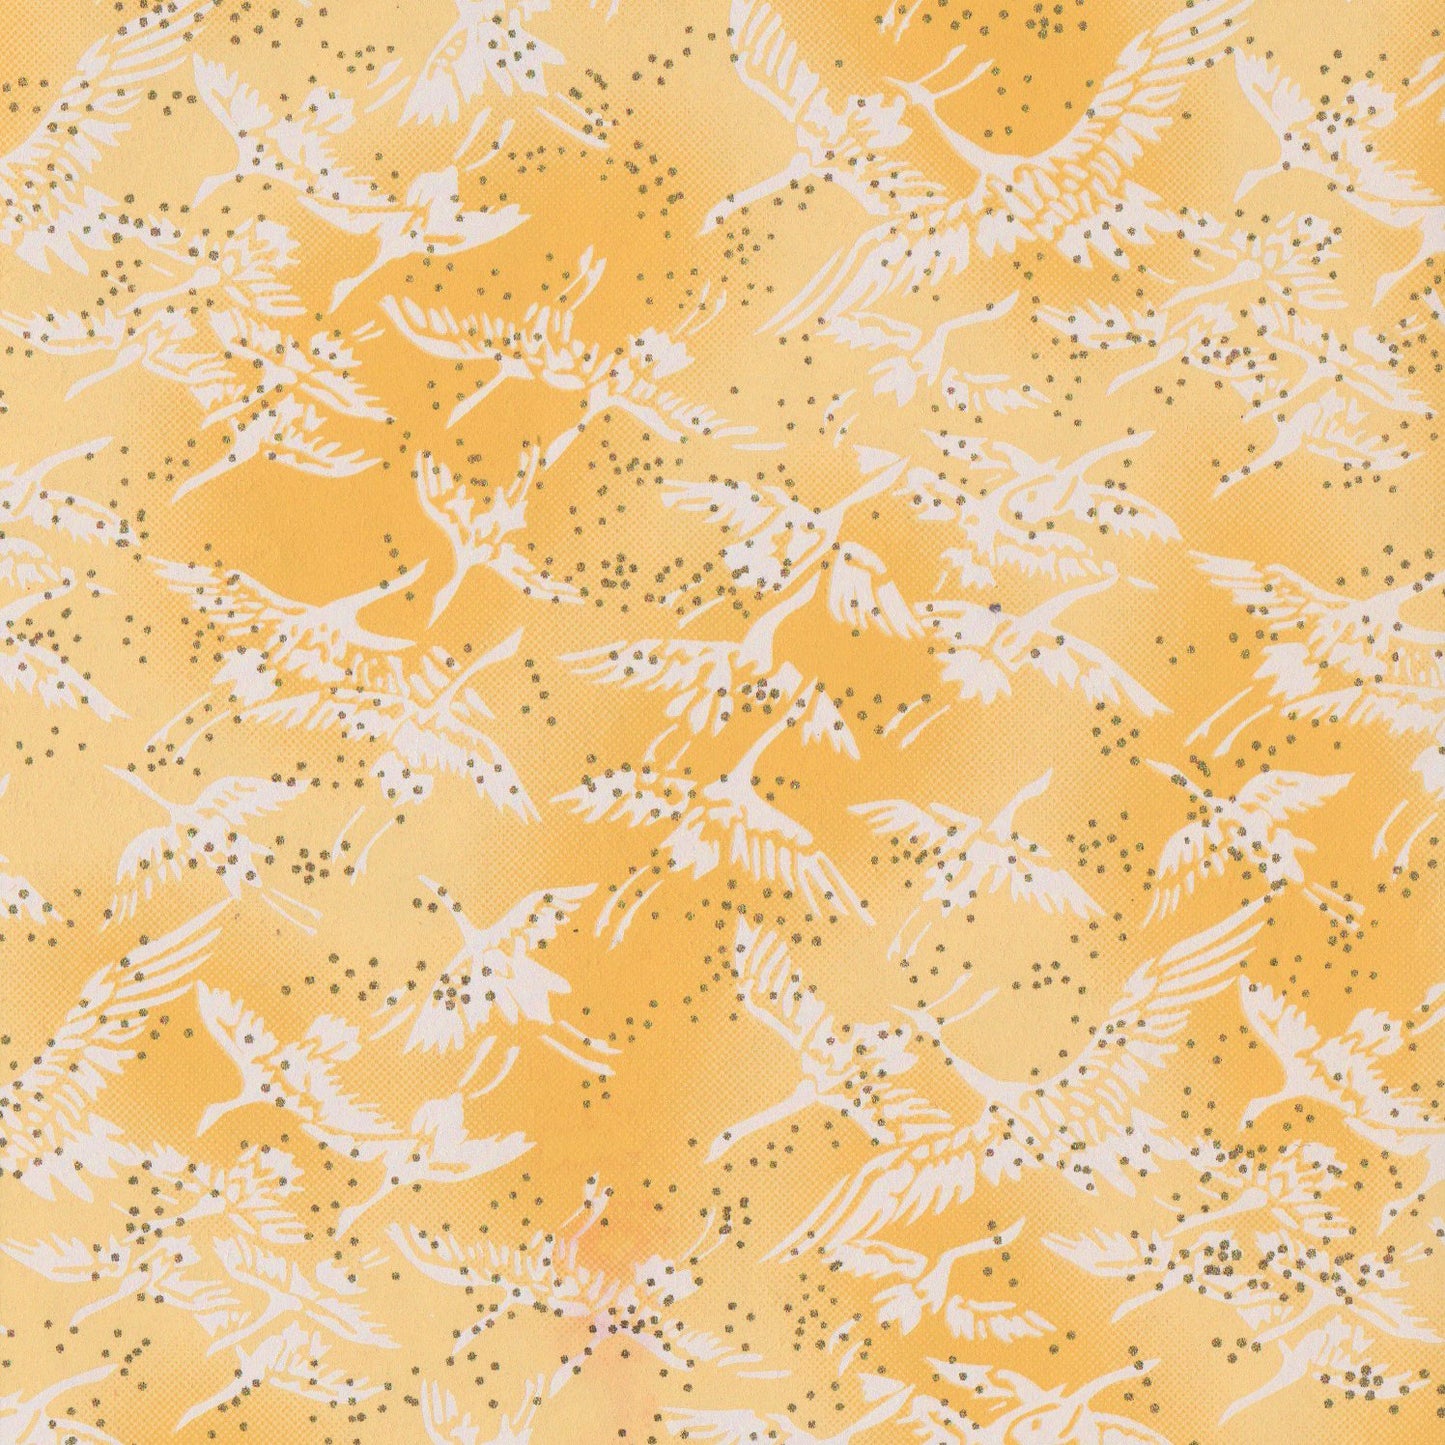 Pack of 20 Sheets 14x14cm Yuzen Washi Origami Paper HZ-091 - Cranes Sunny Yellow - washi paper - Lavender Home London